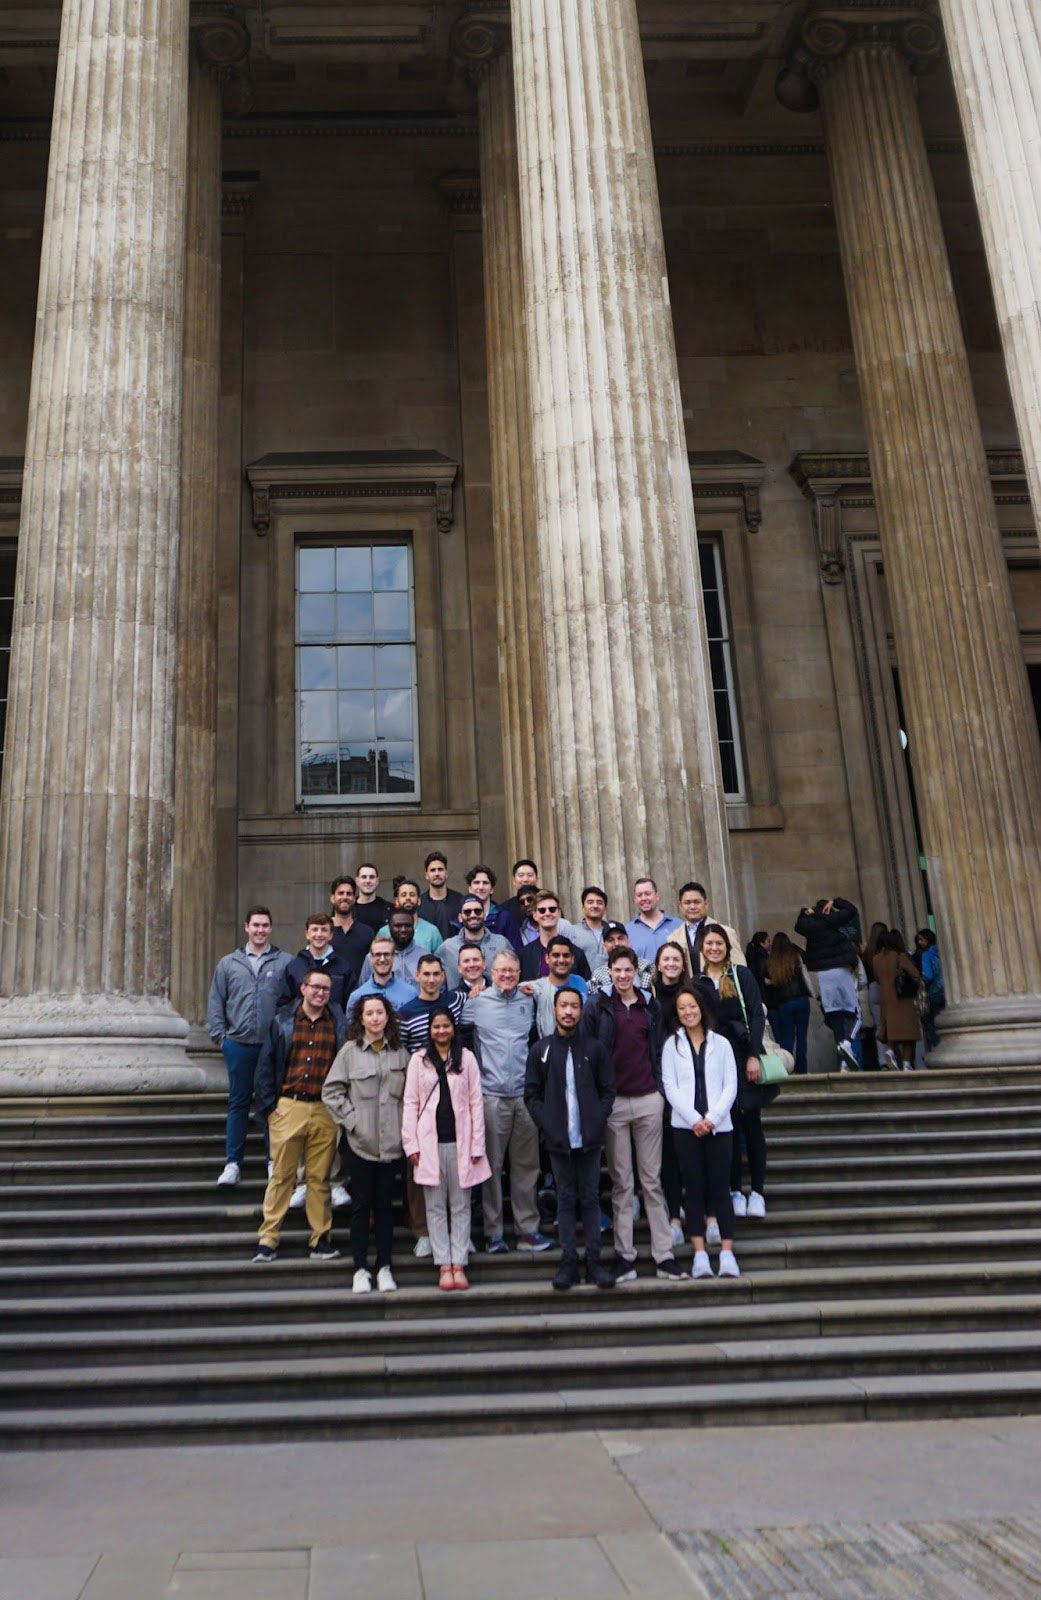 Allan Eberhart, senior associate dean of the MSF program, with a group of MSF students before their tour of the British Museum in London.